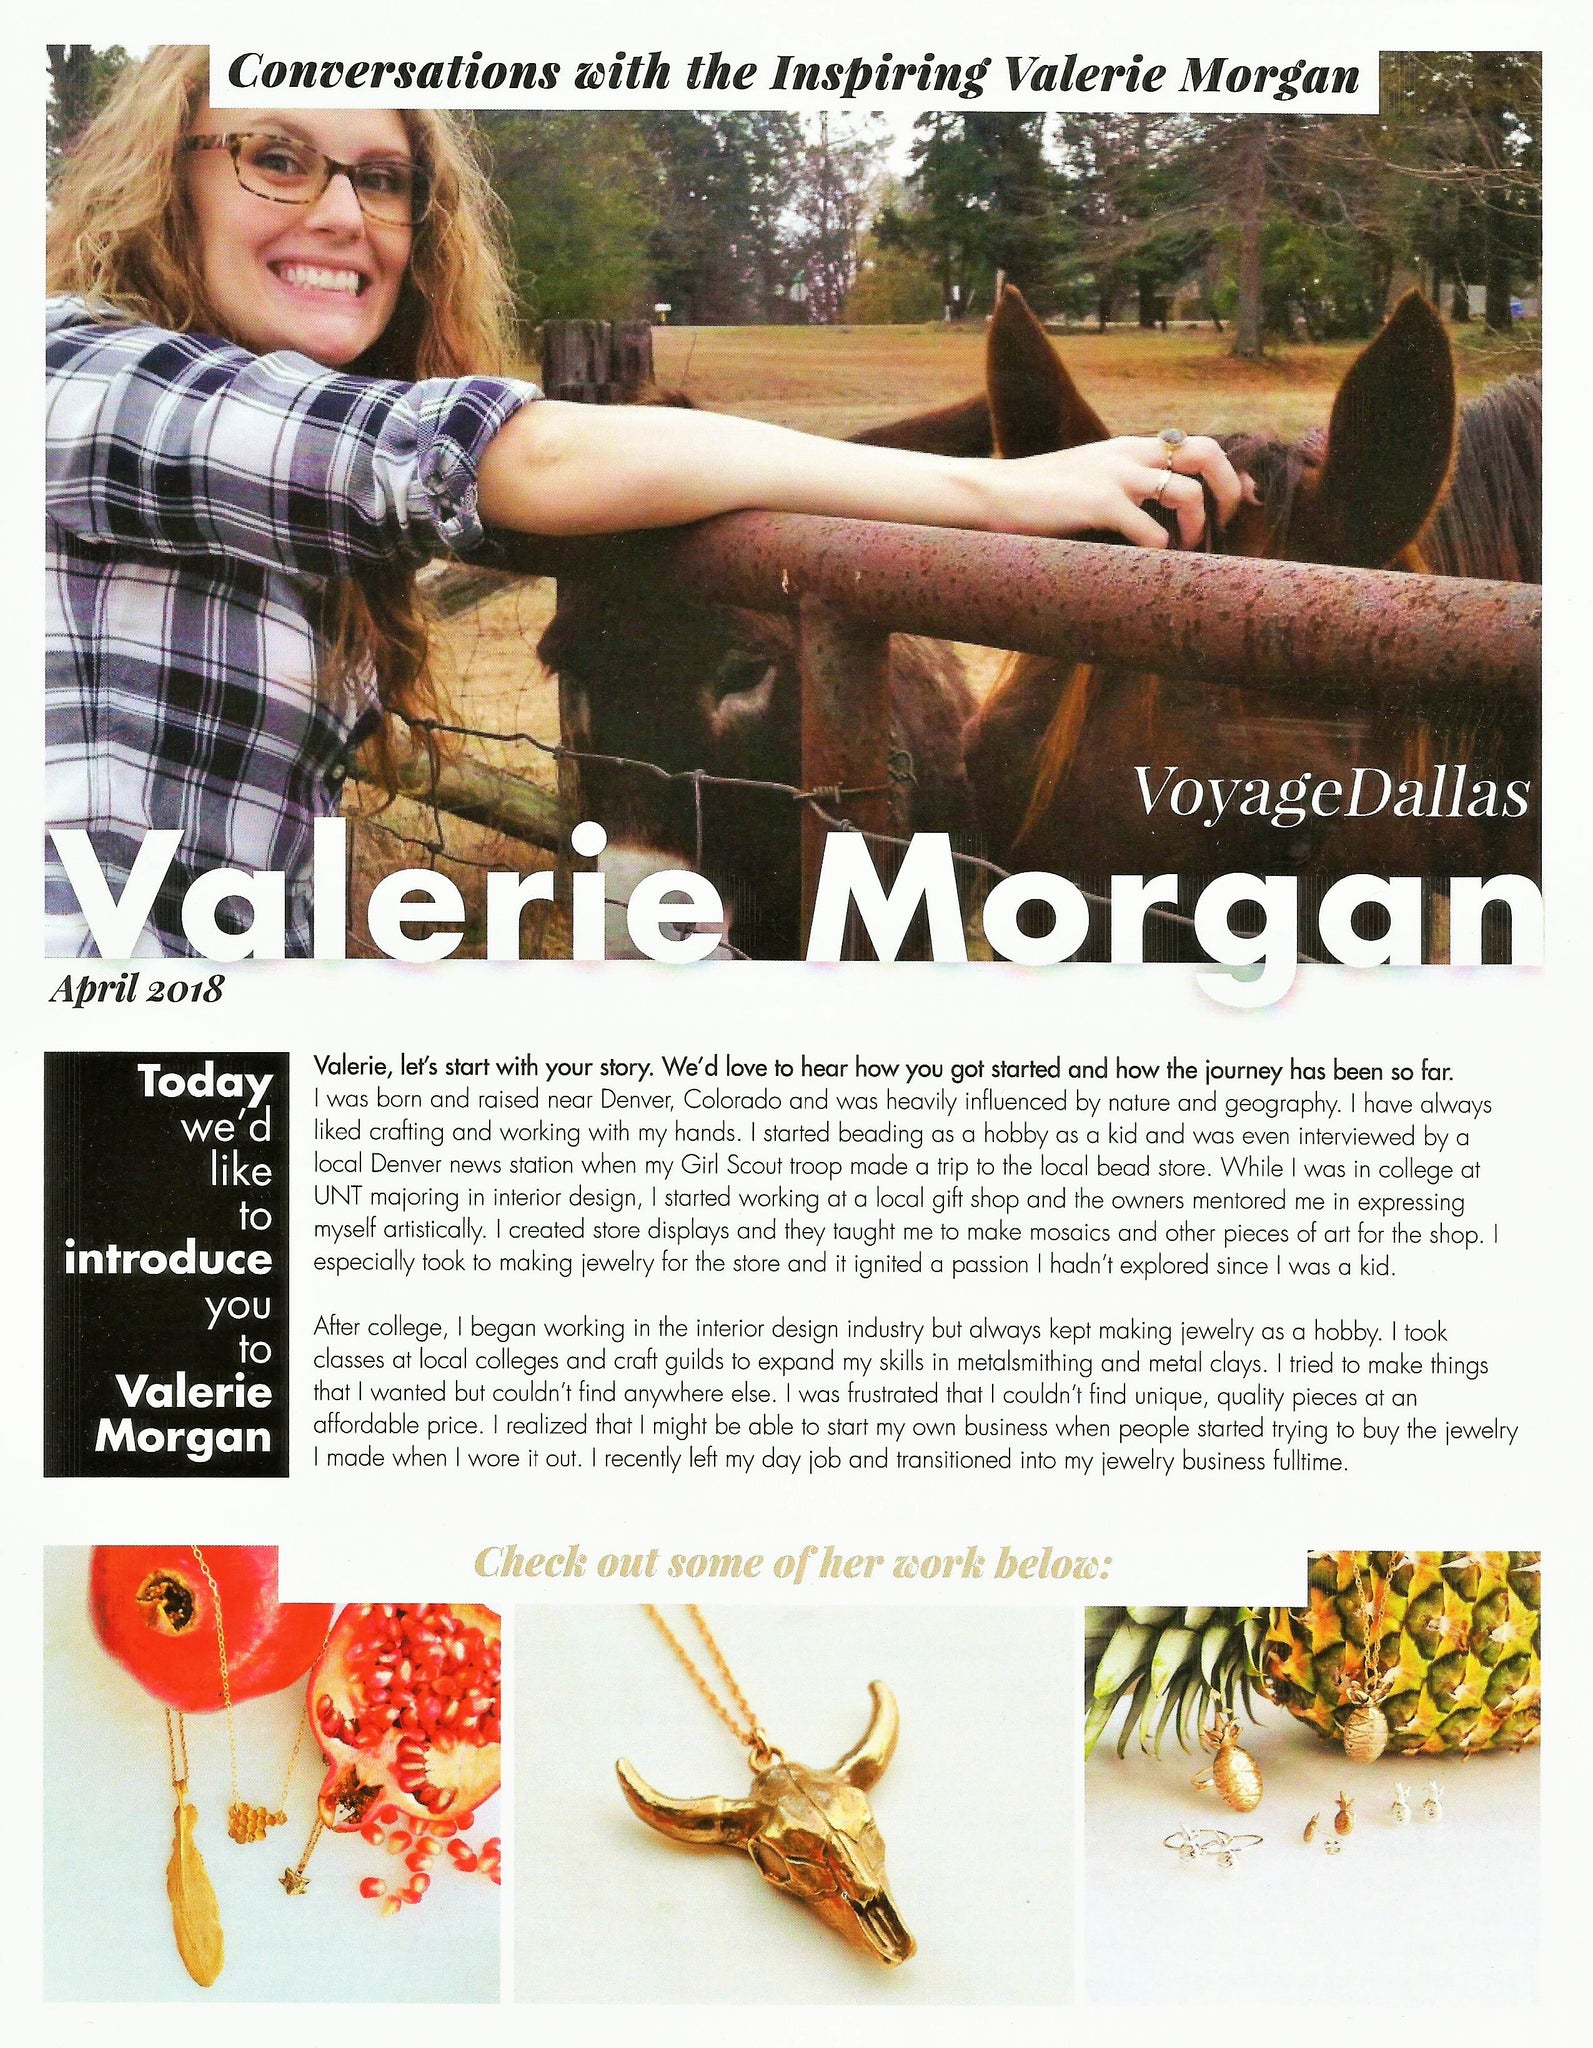 Voyage Dallas Article - Conversations with the inspiring Valerie Morgan pg 1